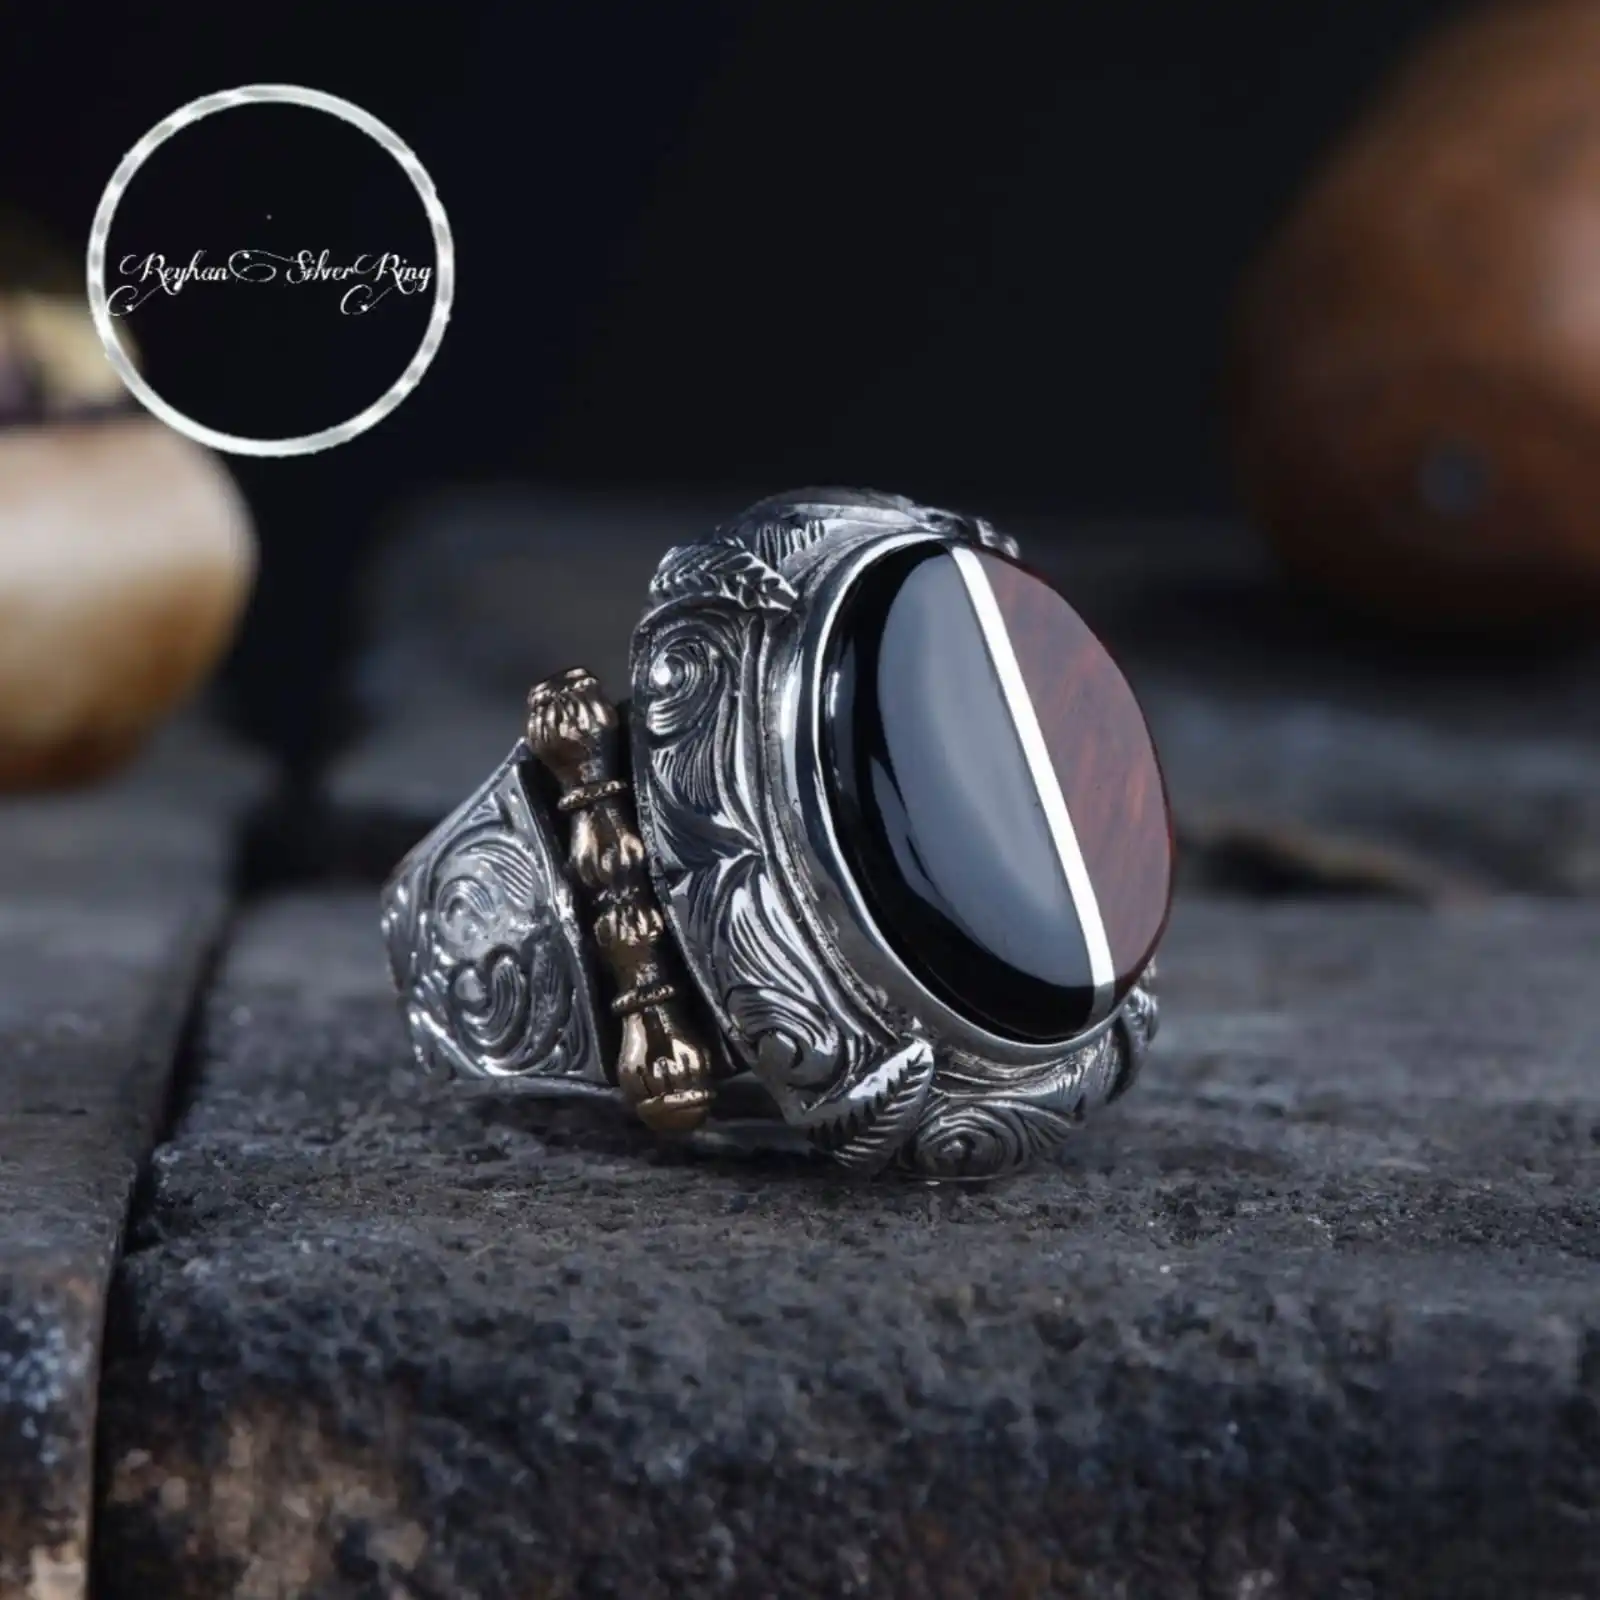 Handcrafted Silver Inlaid Men's Ring with Coca and Oltu Stone - Unique Splitting and Pencil Engraved Design